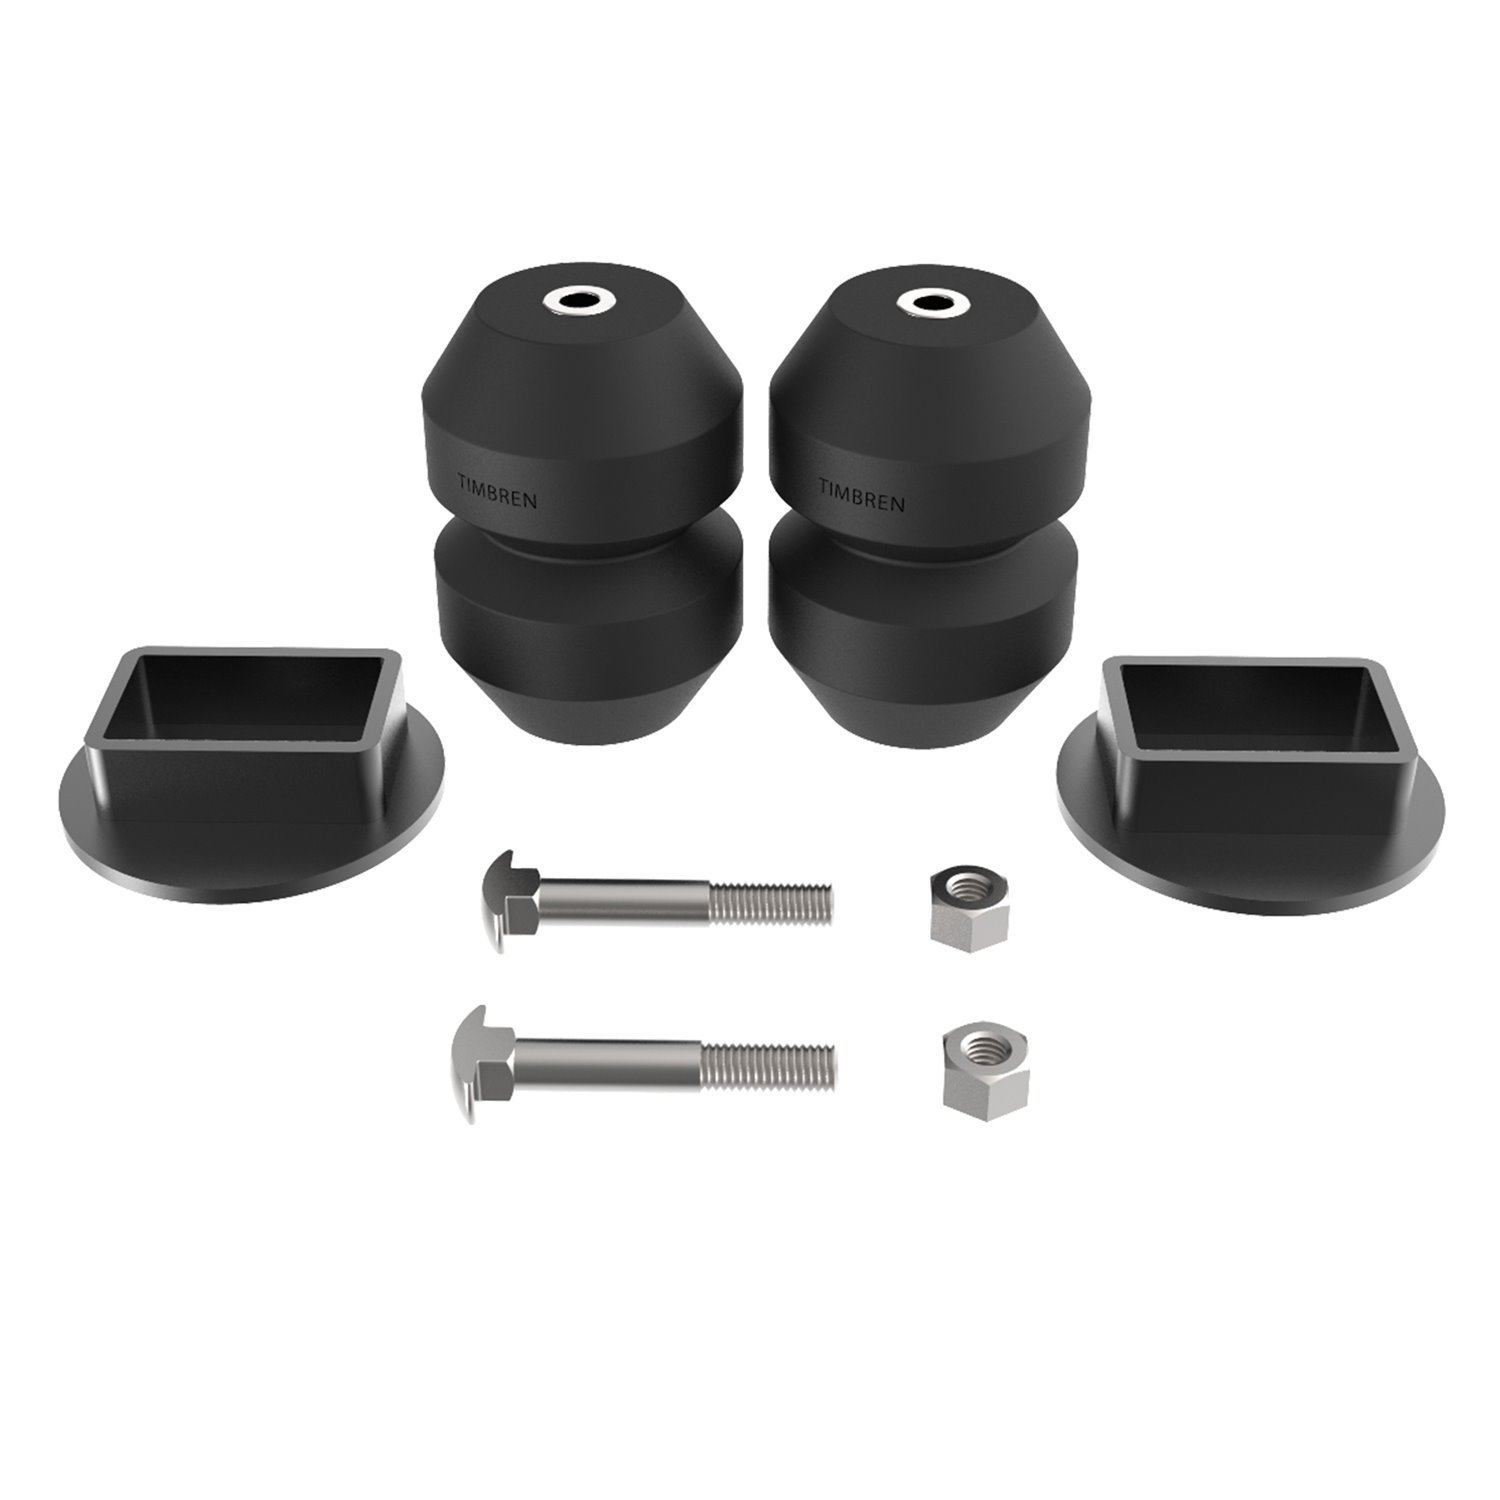 GMRC20 SES Rear Kit Fits Select Chevy C/R Pickup/Suburban; GMC Jimmy/S15 Jimmy [Rated Capacity: 3000 lbs.]